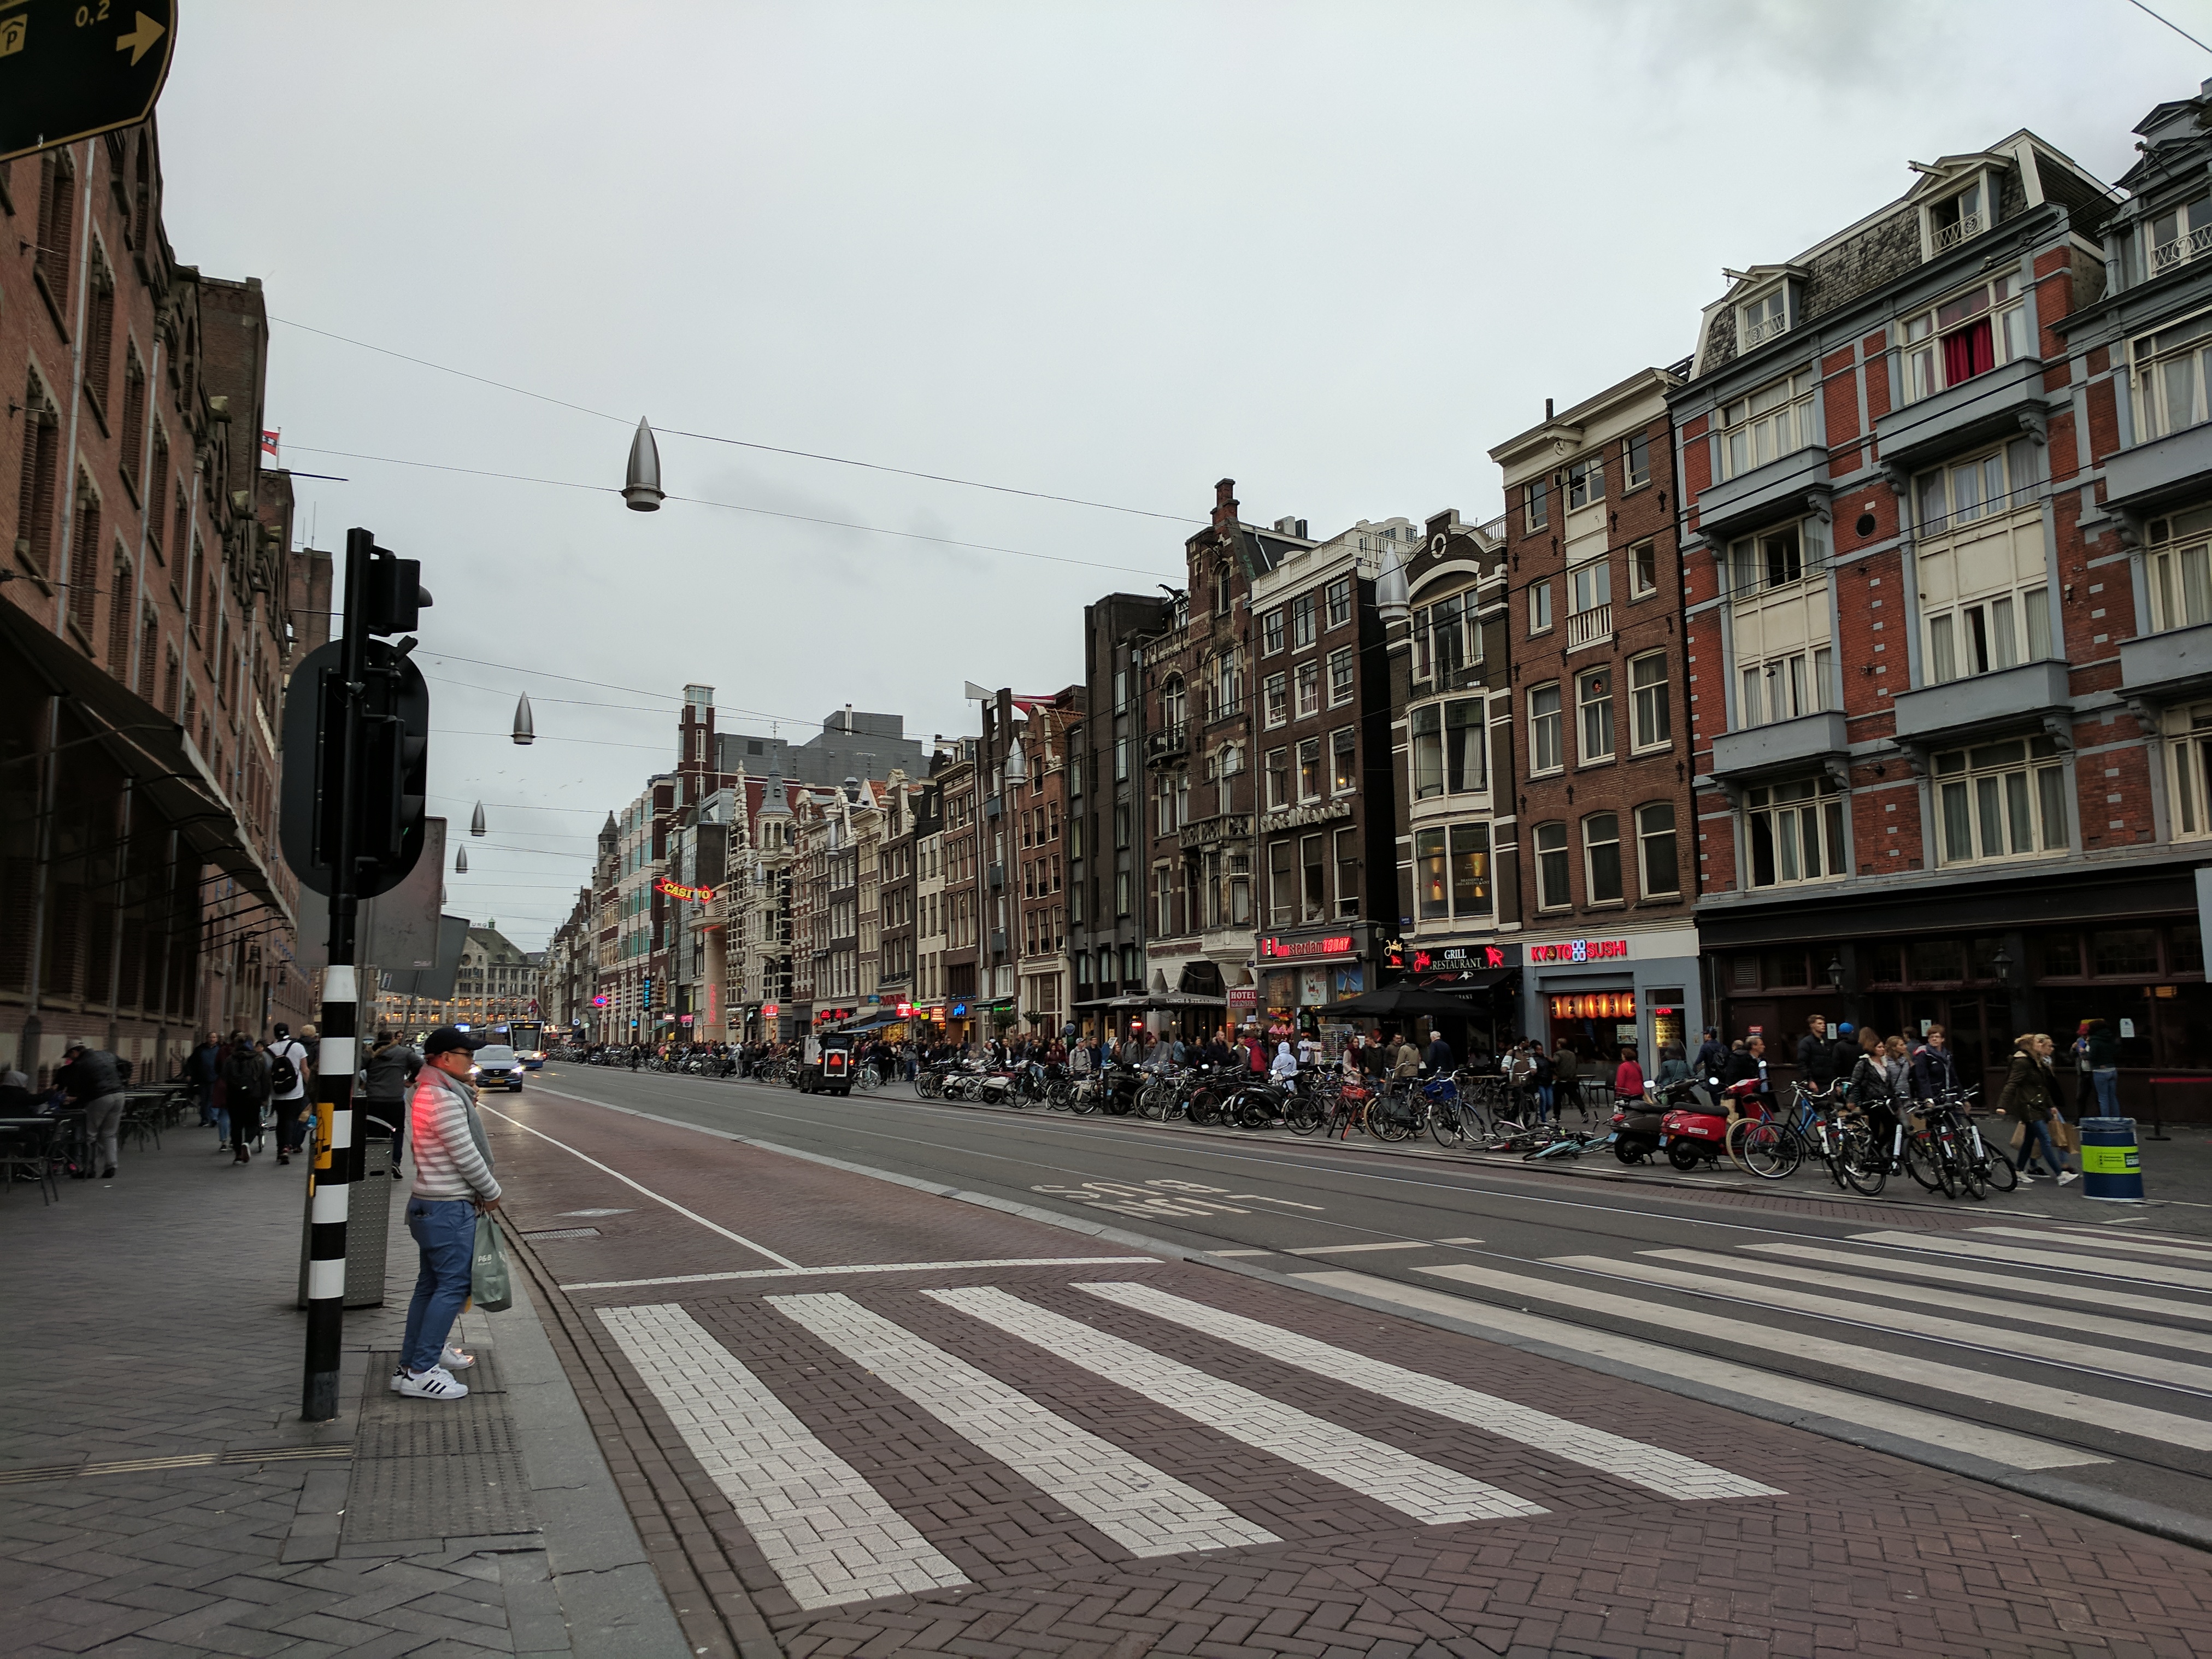 A grey sky, extremely drab Amsterdam street. The architecture is the only thing of note because everything else looks miserable.